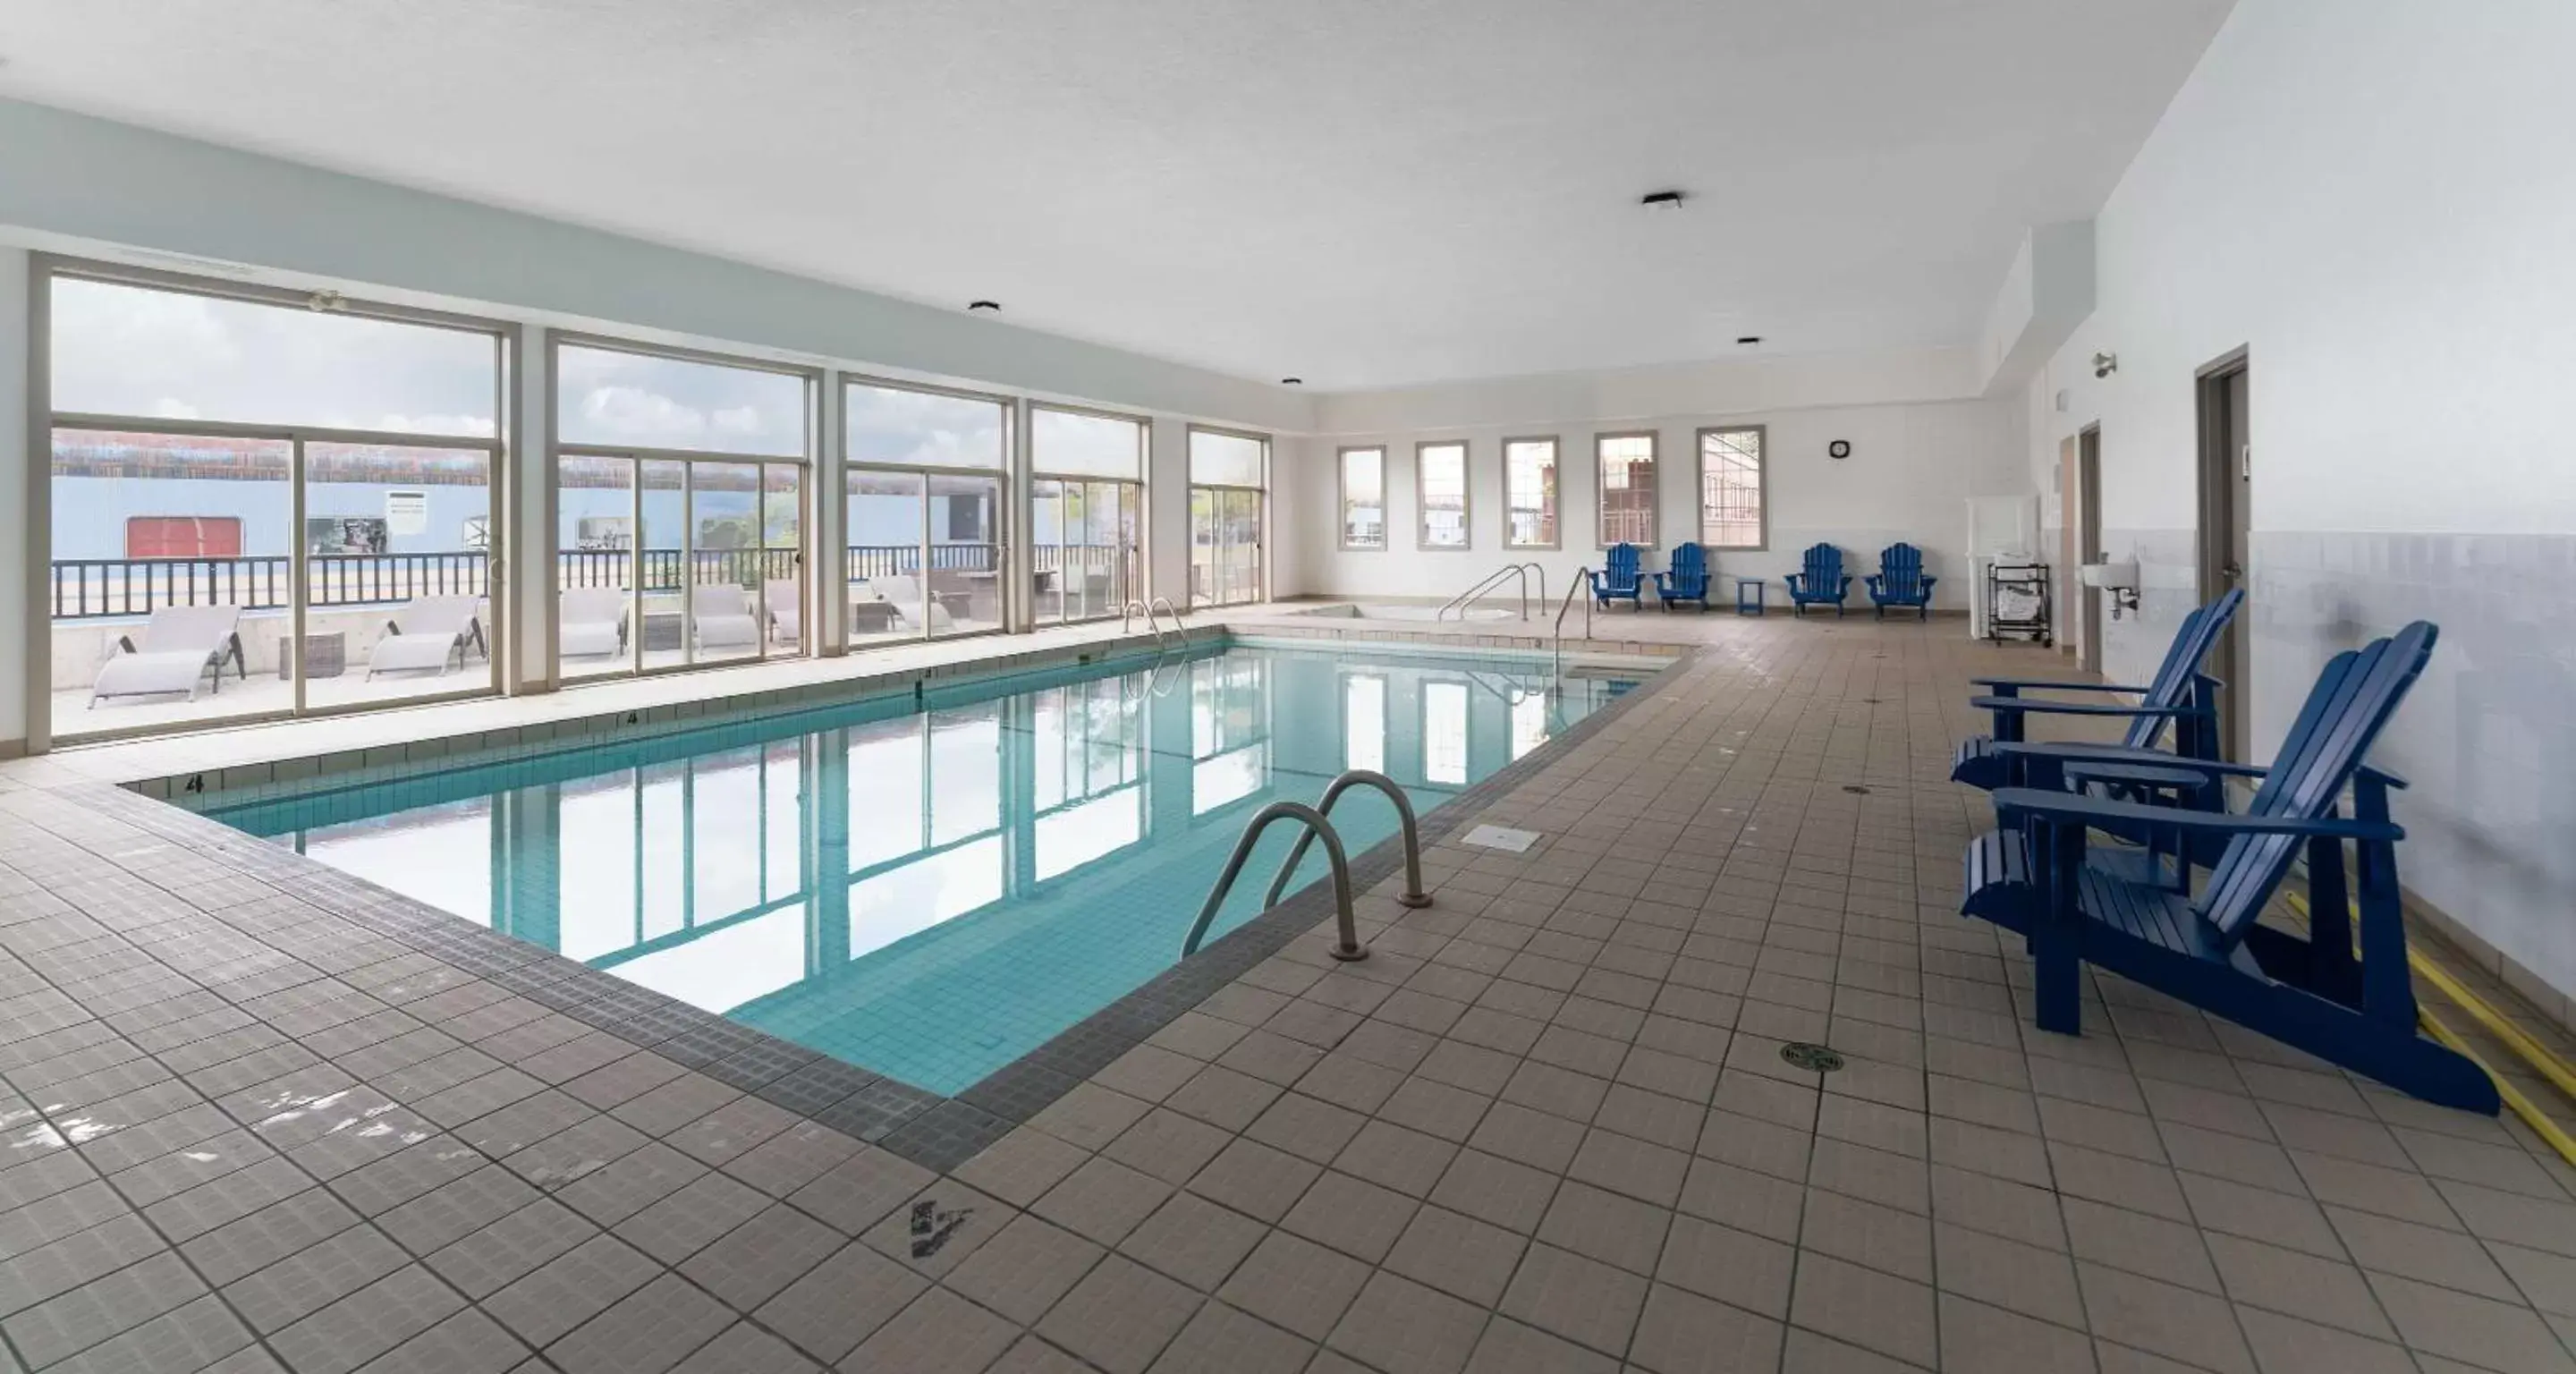 Pool view, Swimming Pool in Prestige Rocky Mountain Resort Cranbrook, WorldHotels Crafted